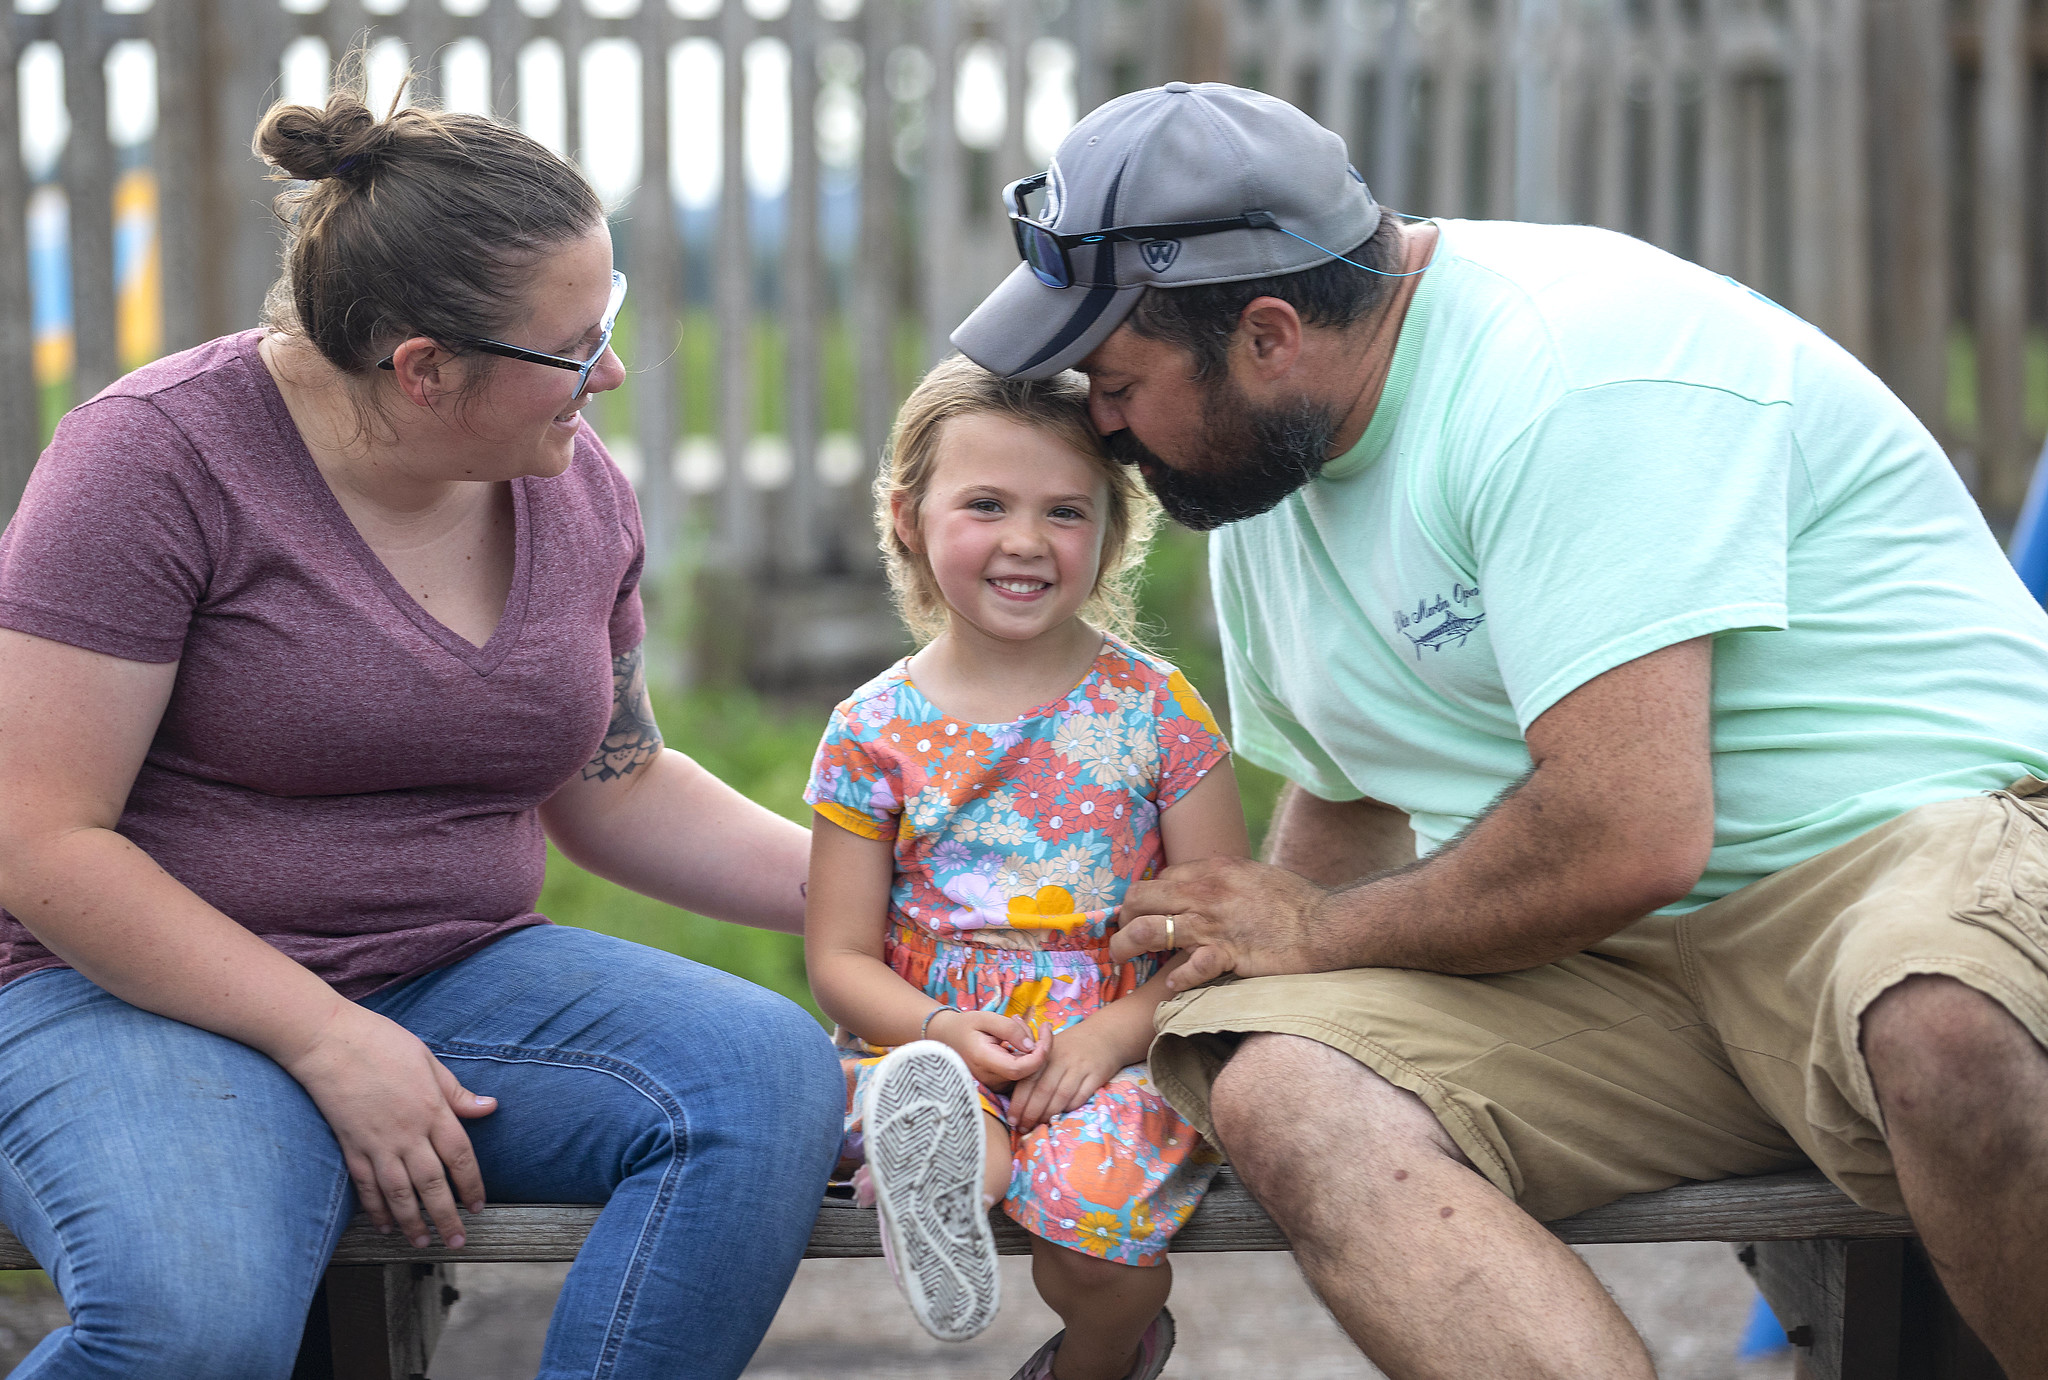 A man and a woman to the left and right of a little girl in a dress on a park bench. The little girl smiles as the man leans down and nuzzles the side of her head.